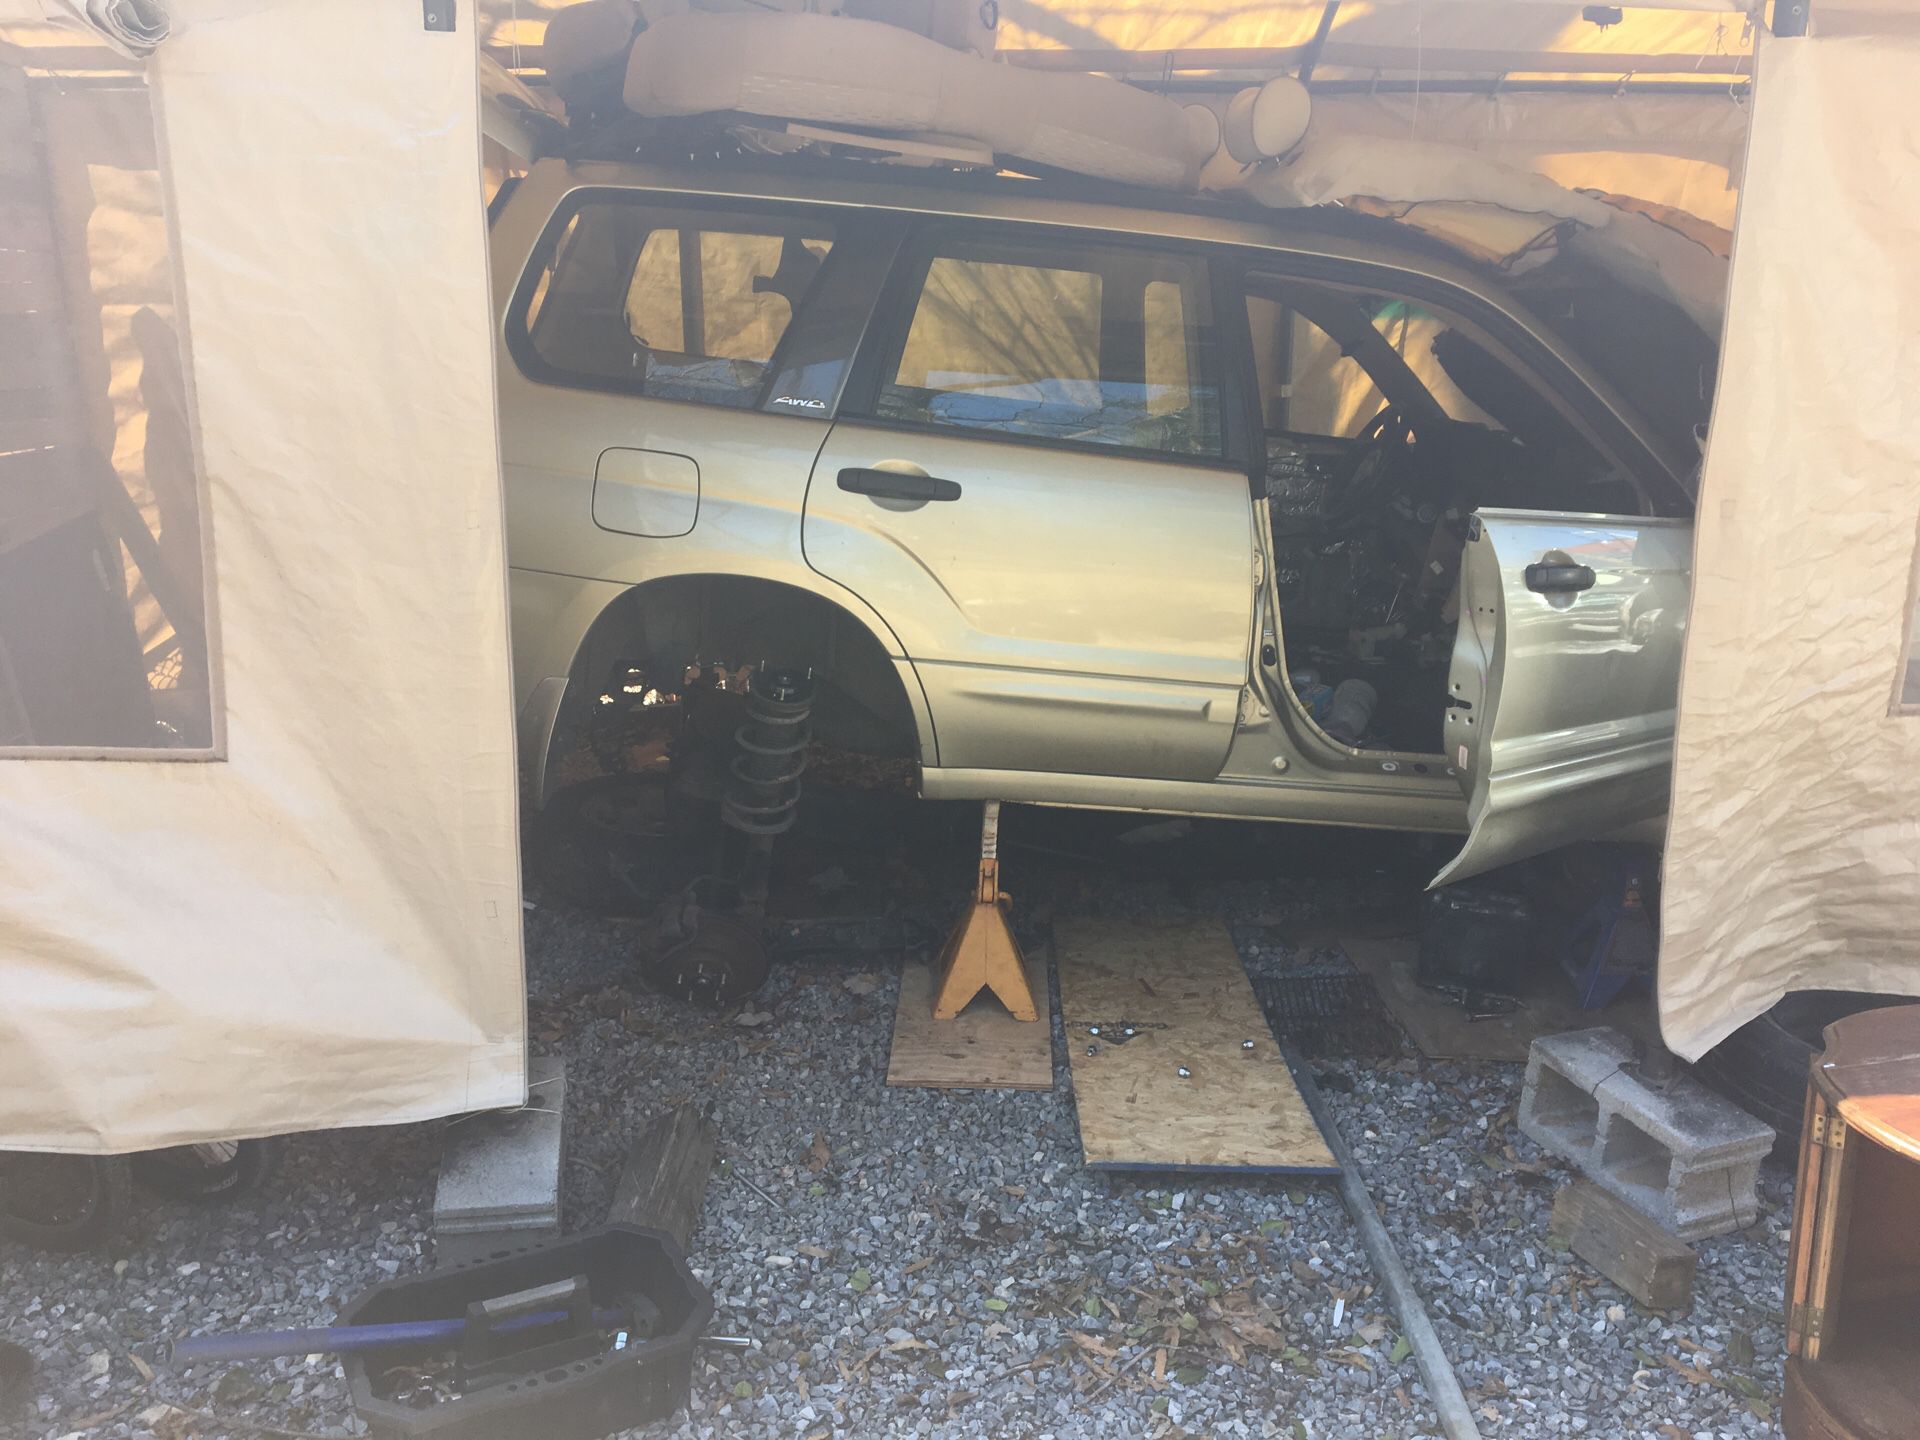 03-05 Subaru Forester for parts